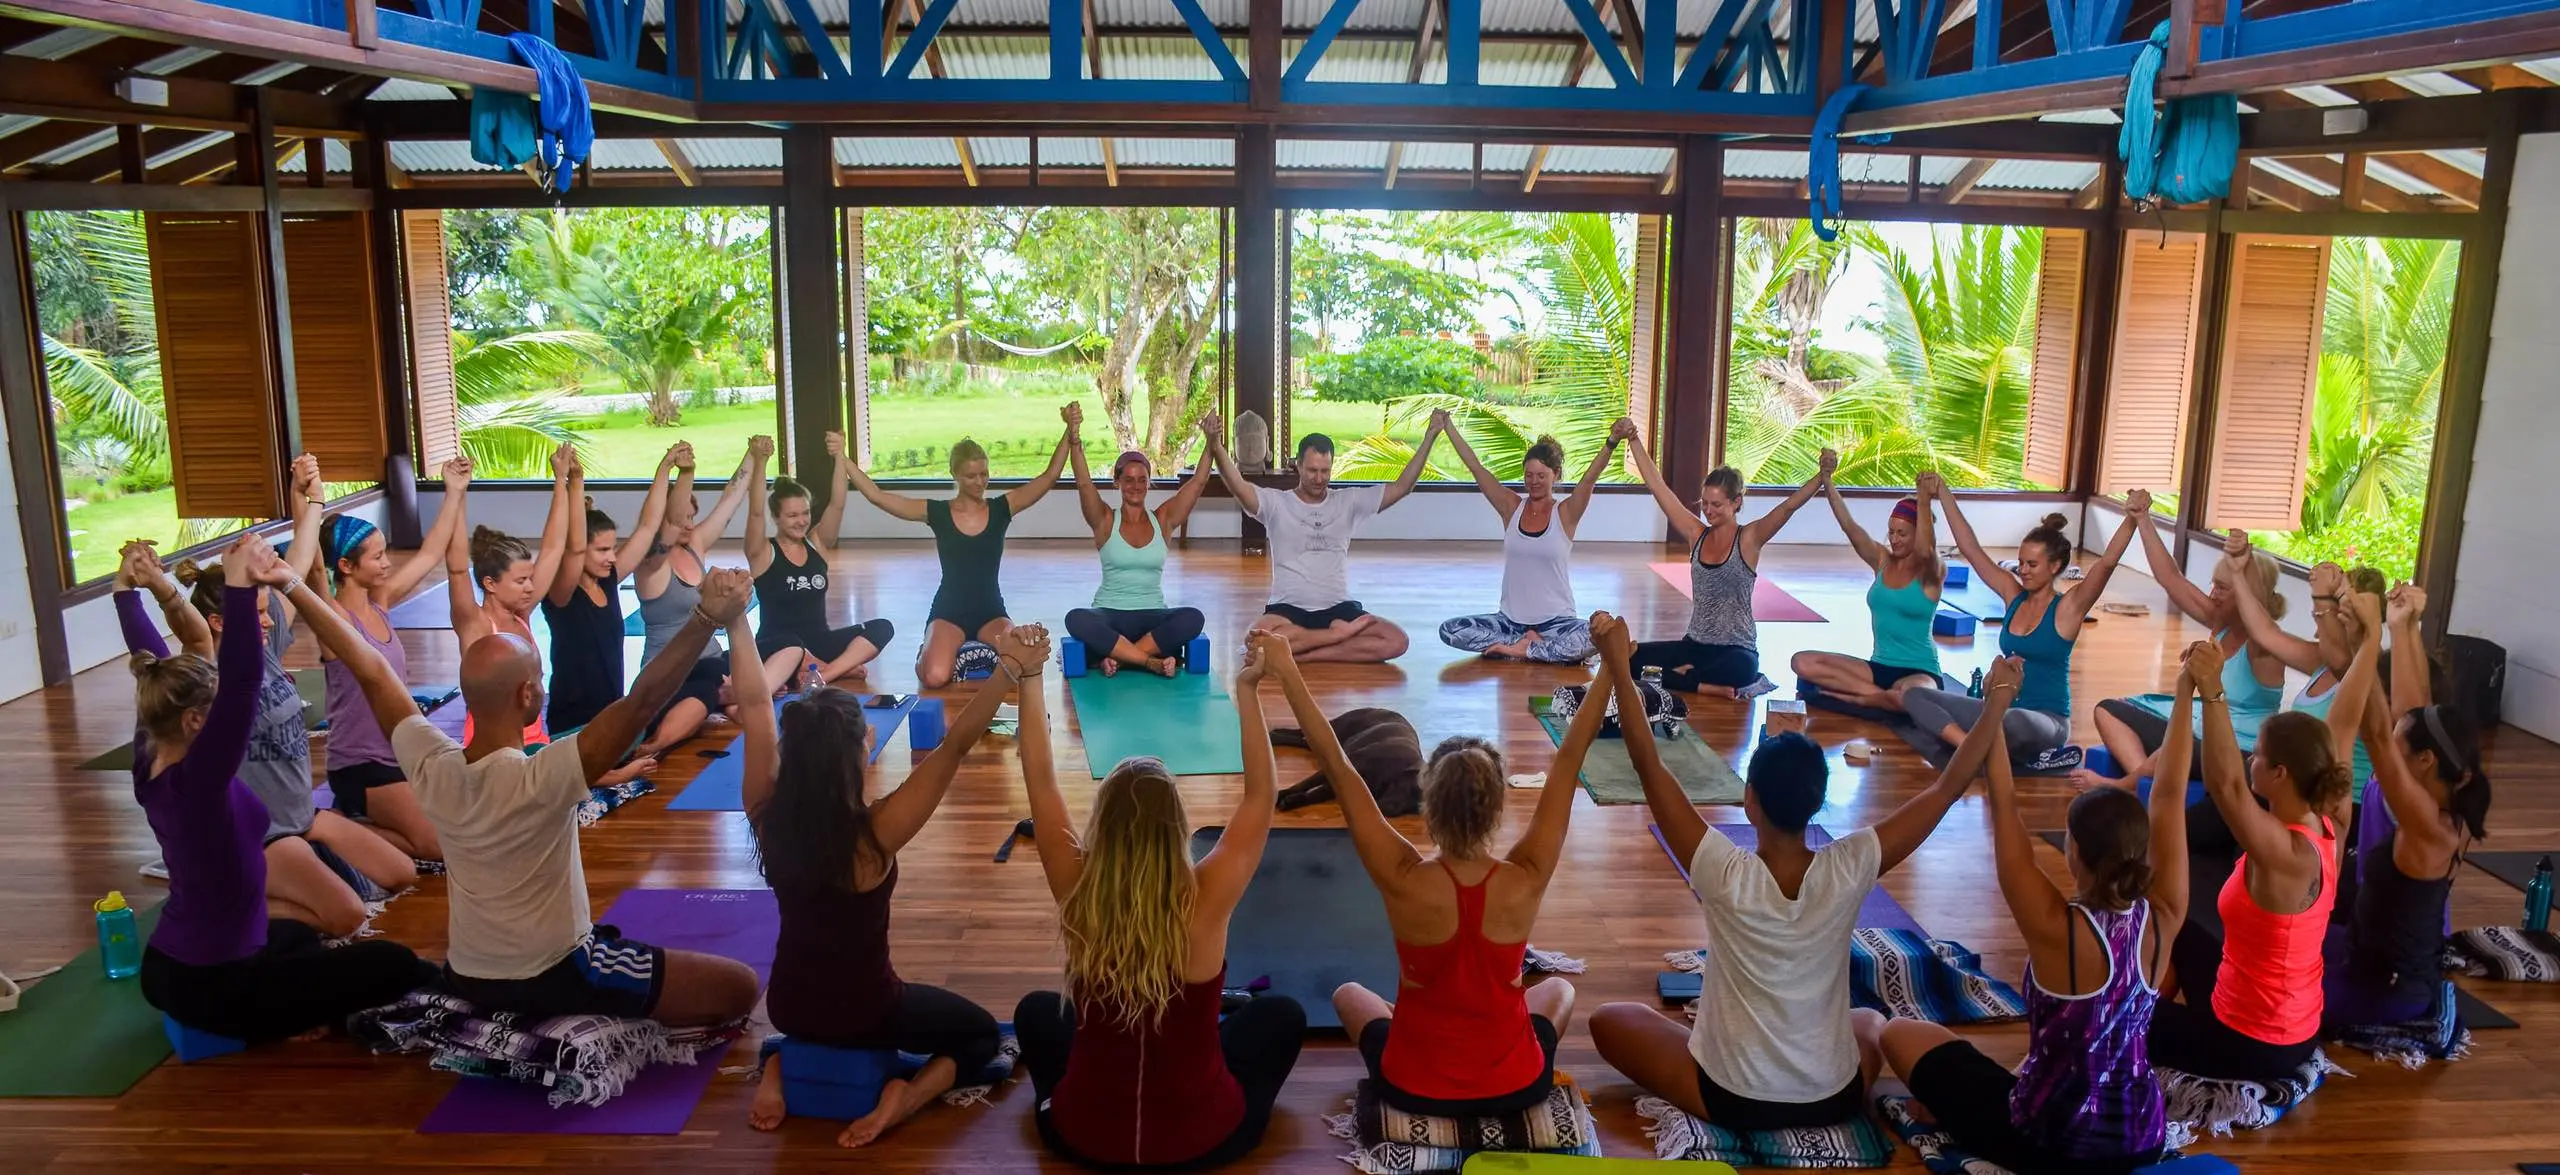 yoga teacher training immersion - What is a yoga immersion